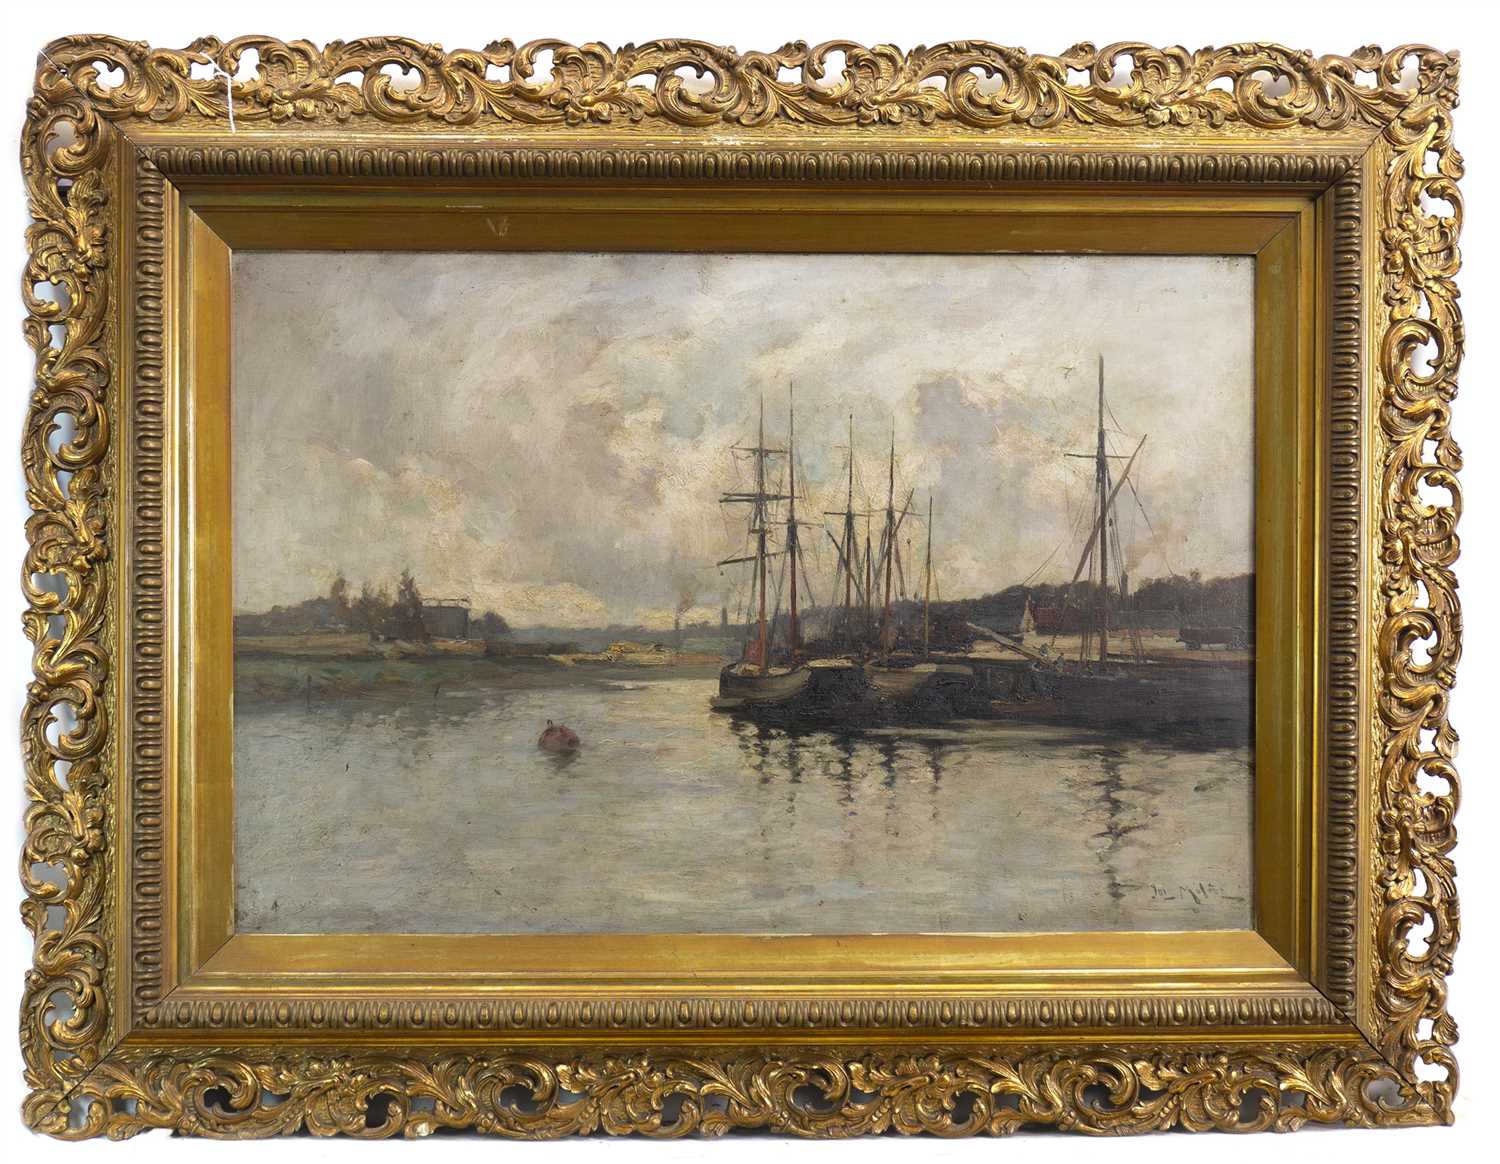 Lot 66 - BOATS IN LEITH HARBOUR, AN OIL BY JOSEPH MILNE